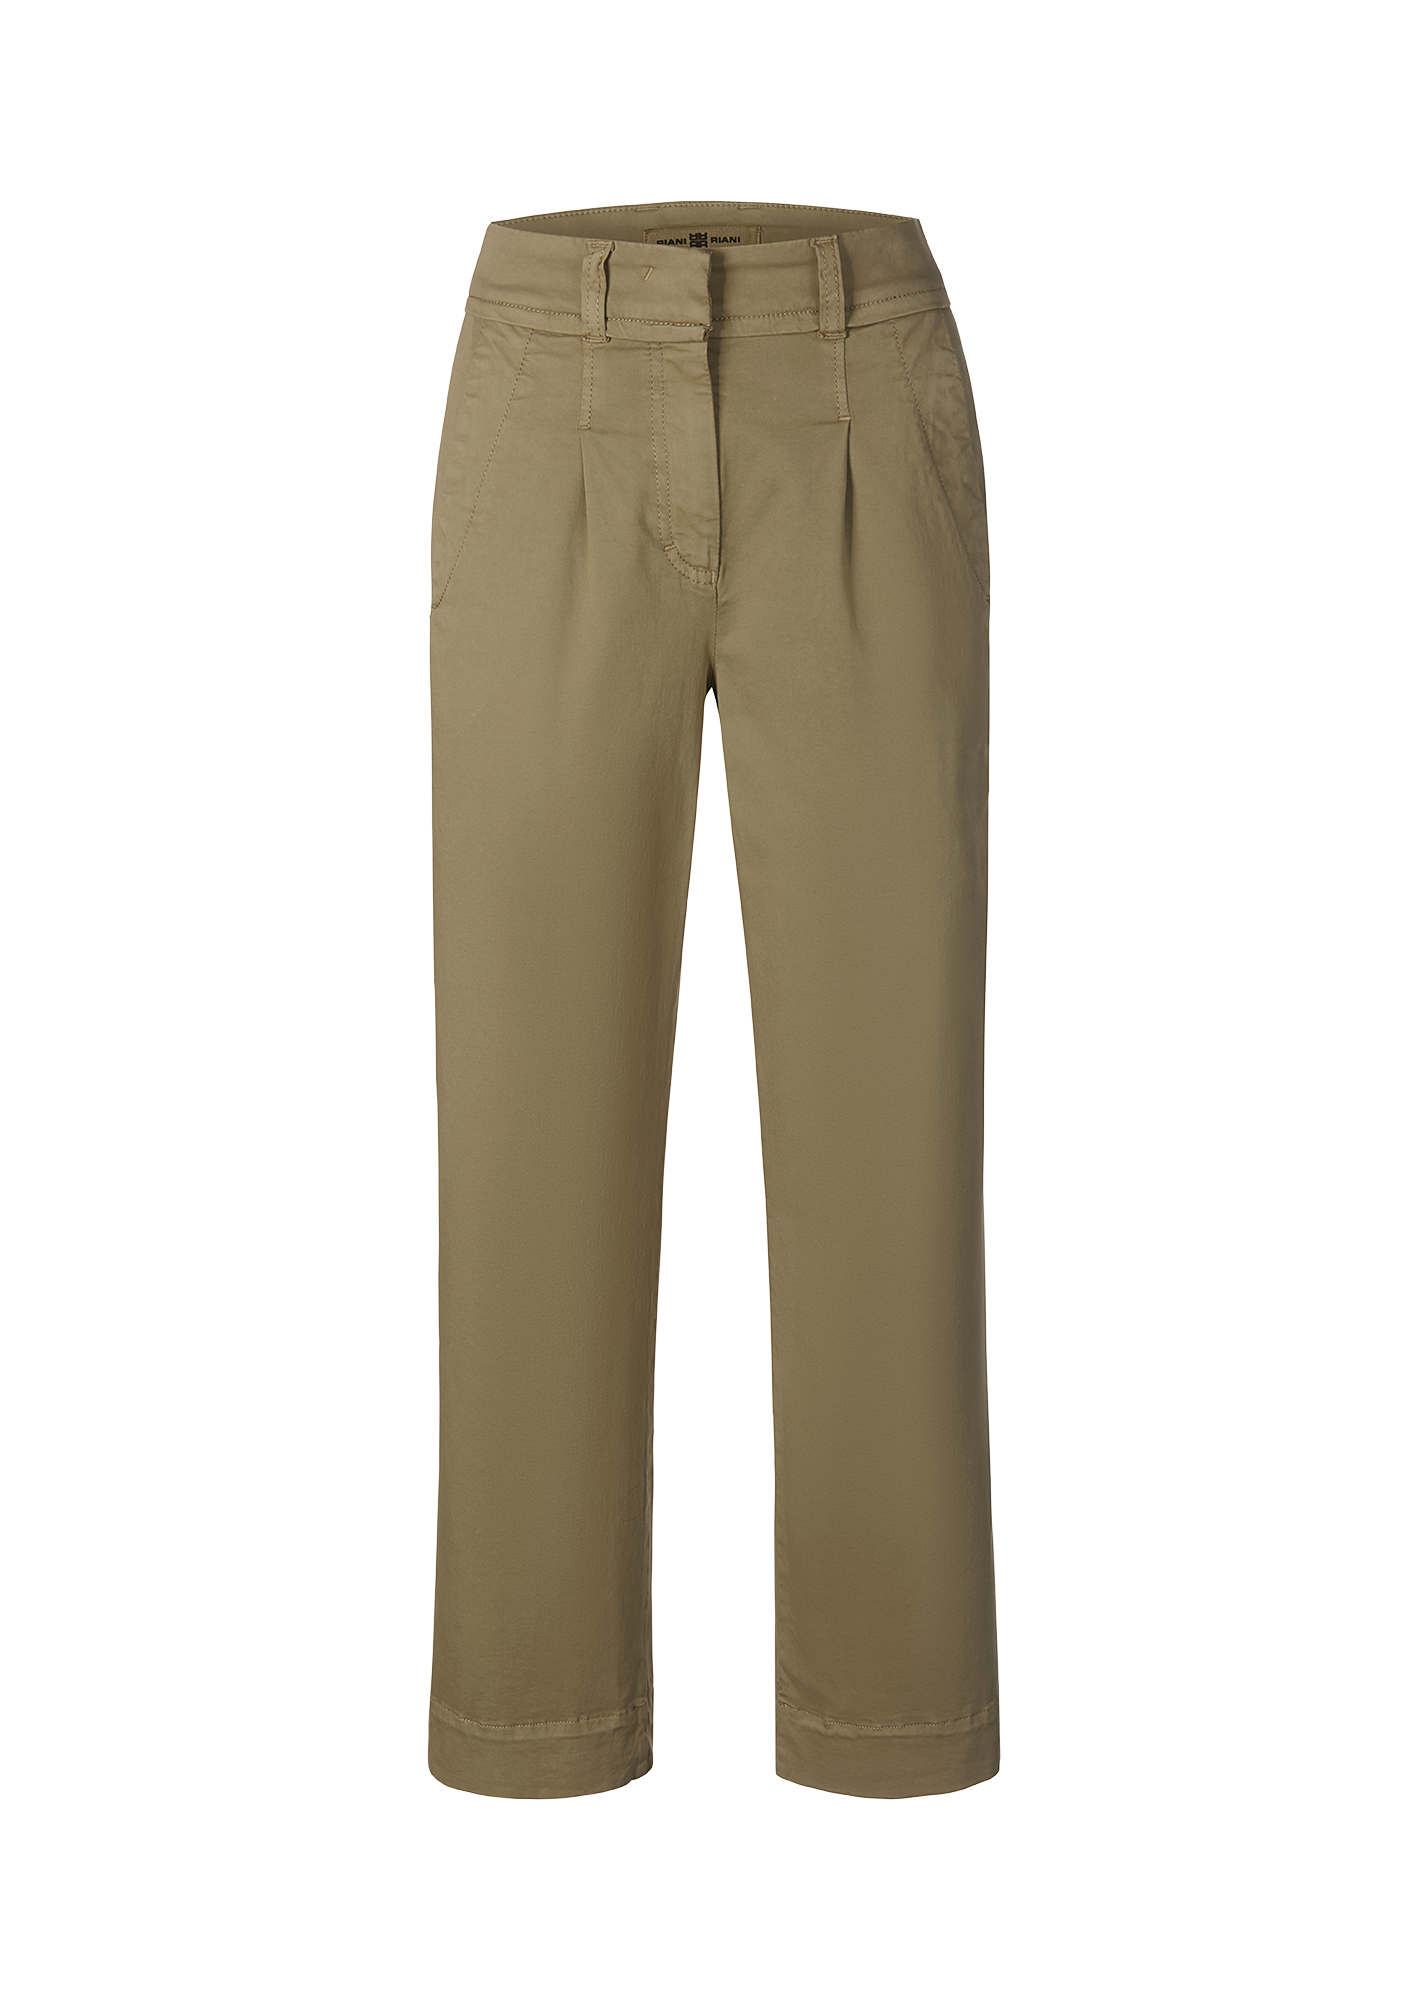 RIANI-OUTLET-SALE-Hose-wide-fit-Hosen-ARCHIVE-COLLECTION_33927eae-1826-4e77-ae84-120214d7ab7c.png